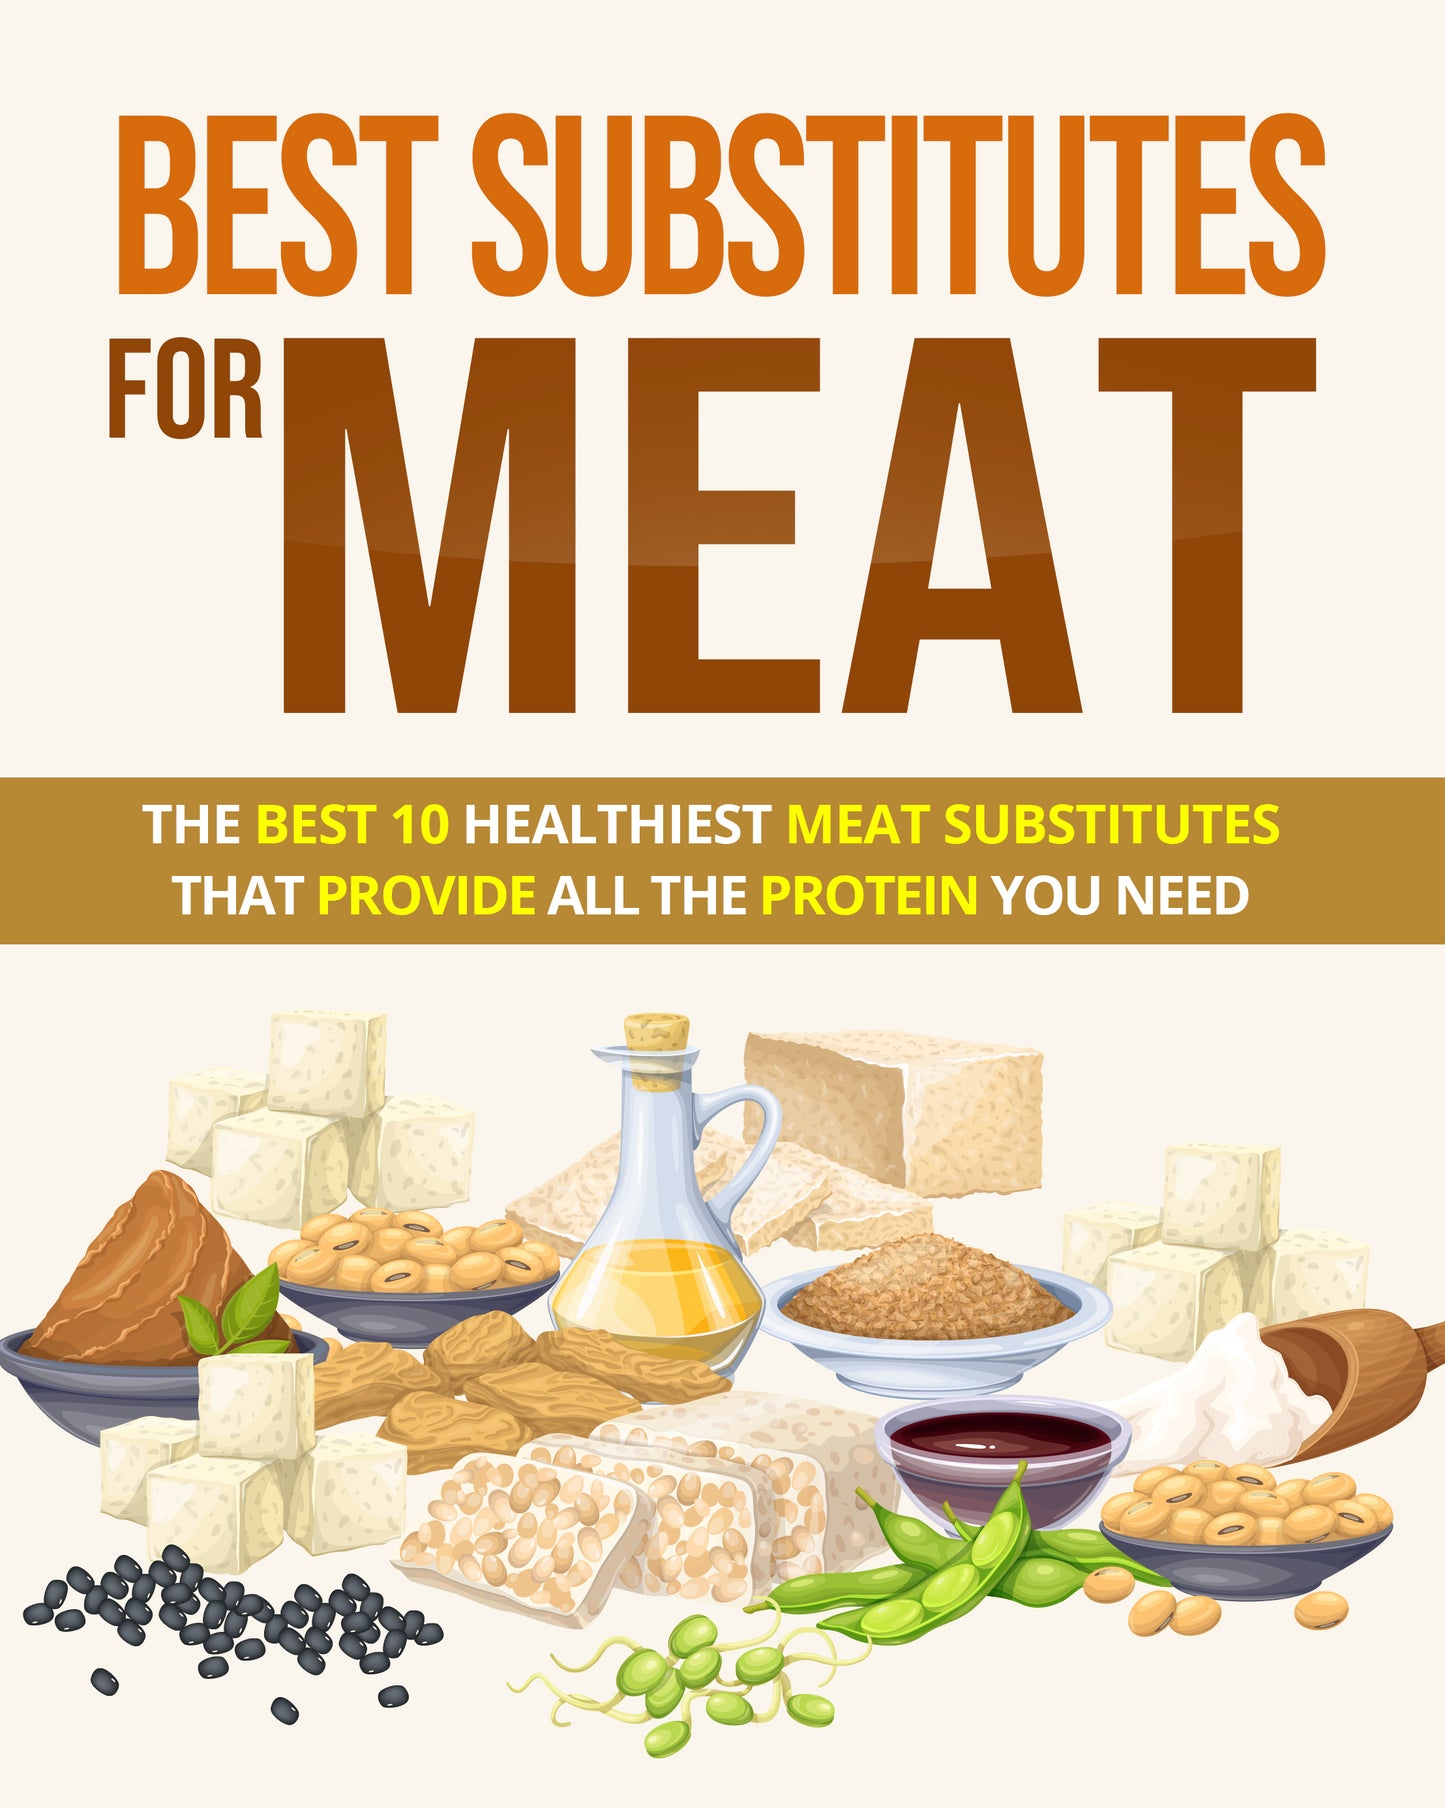 Best Substitutes for Meat